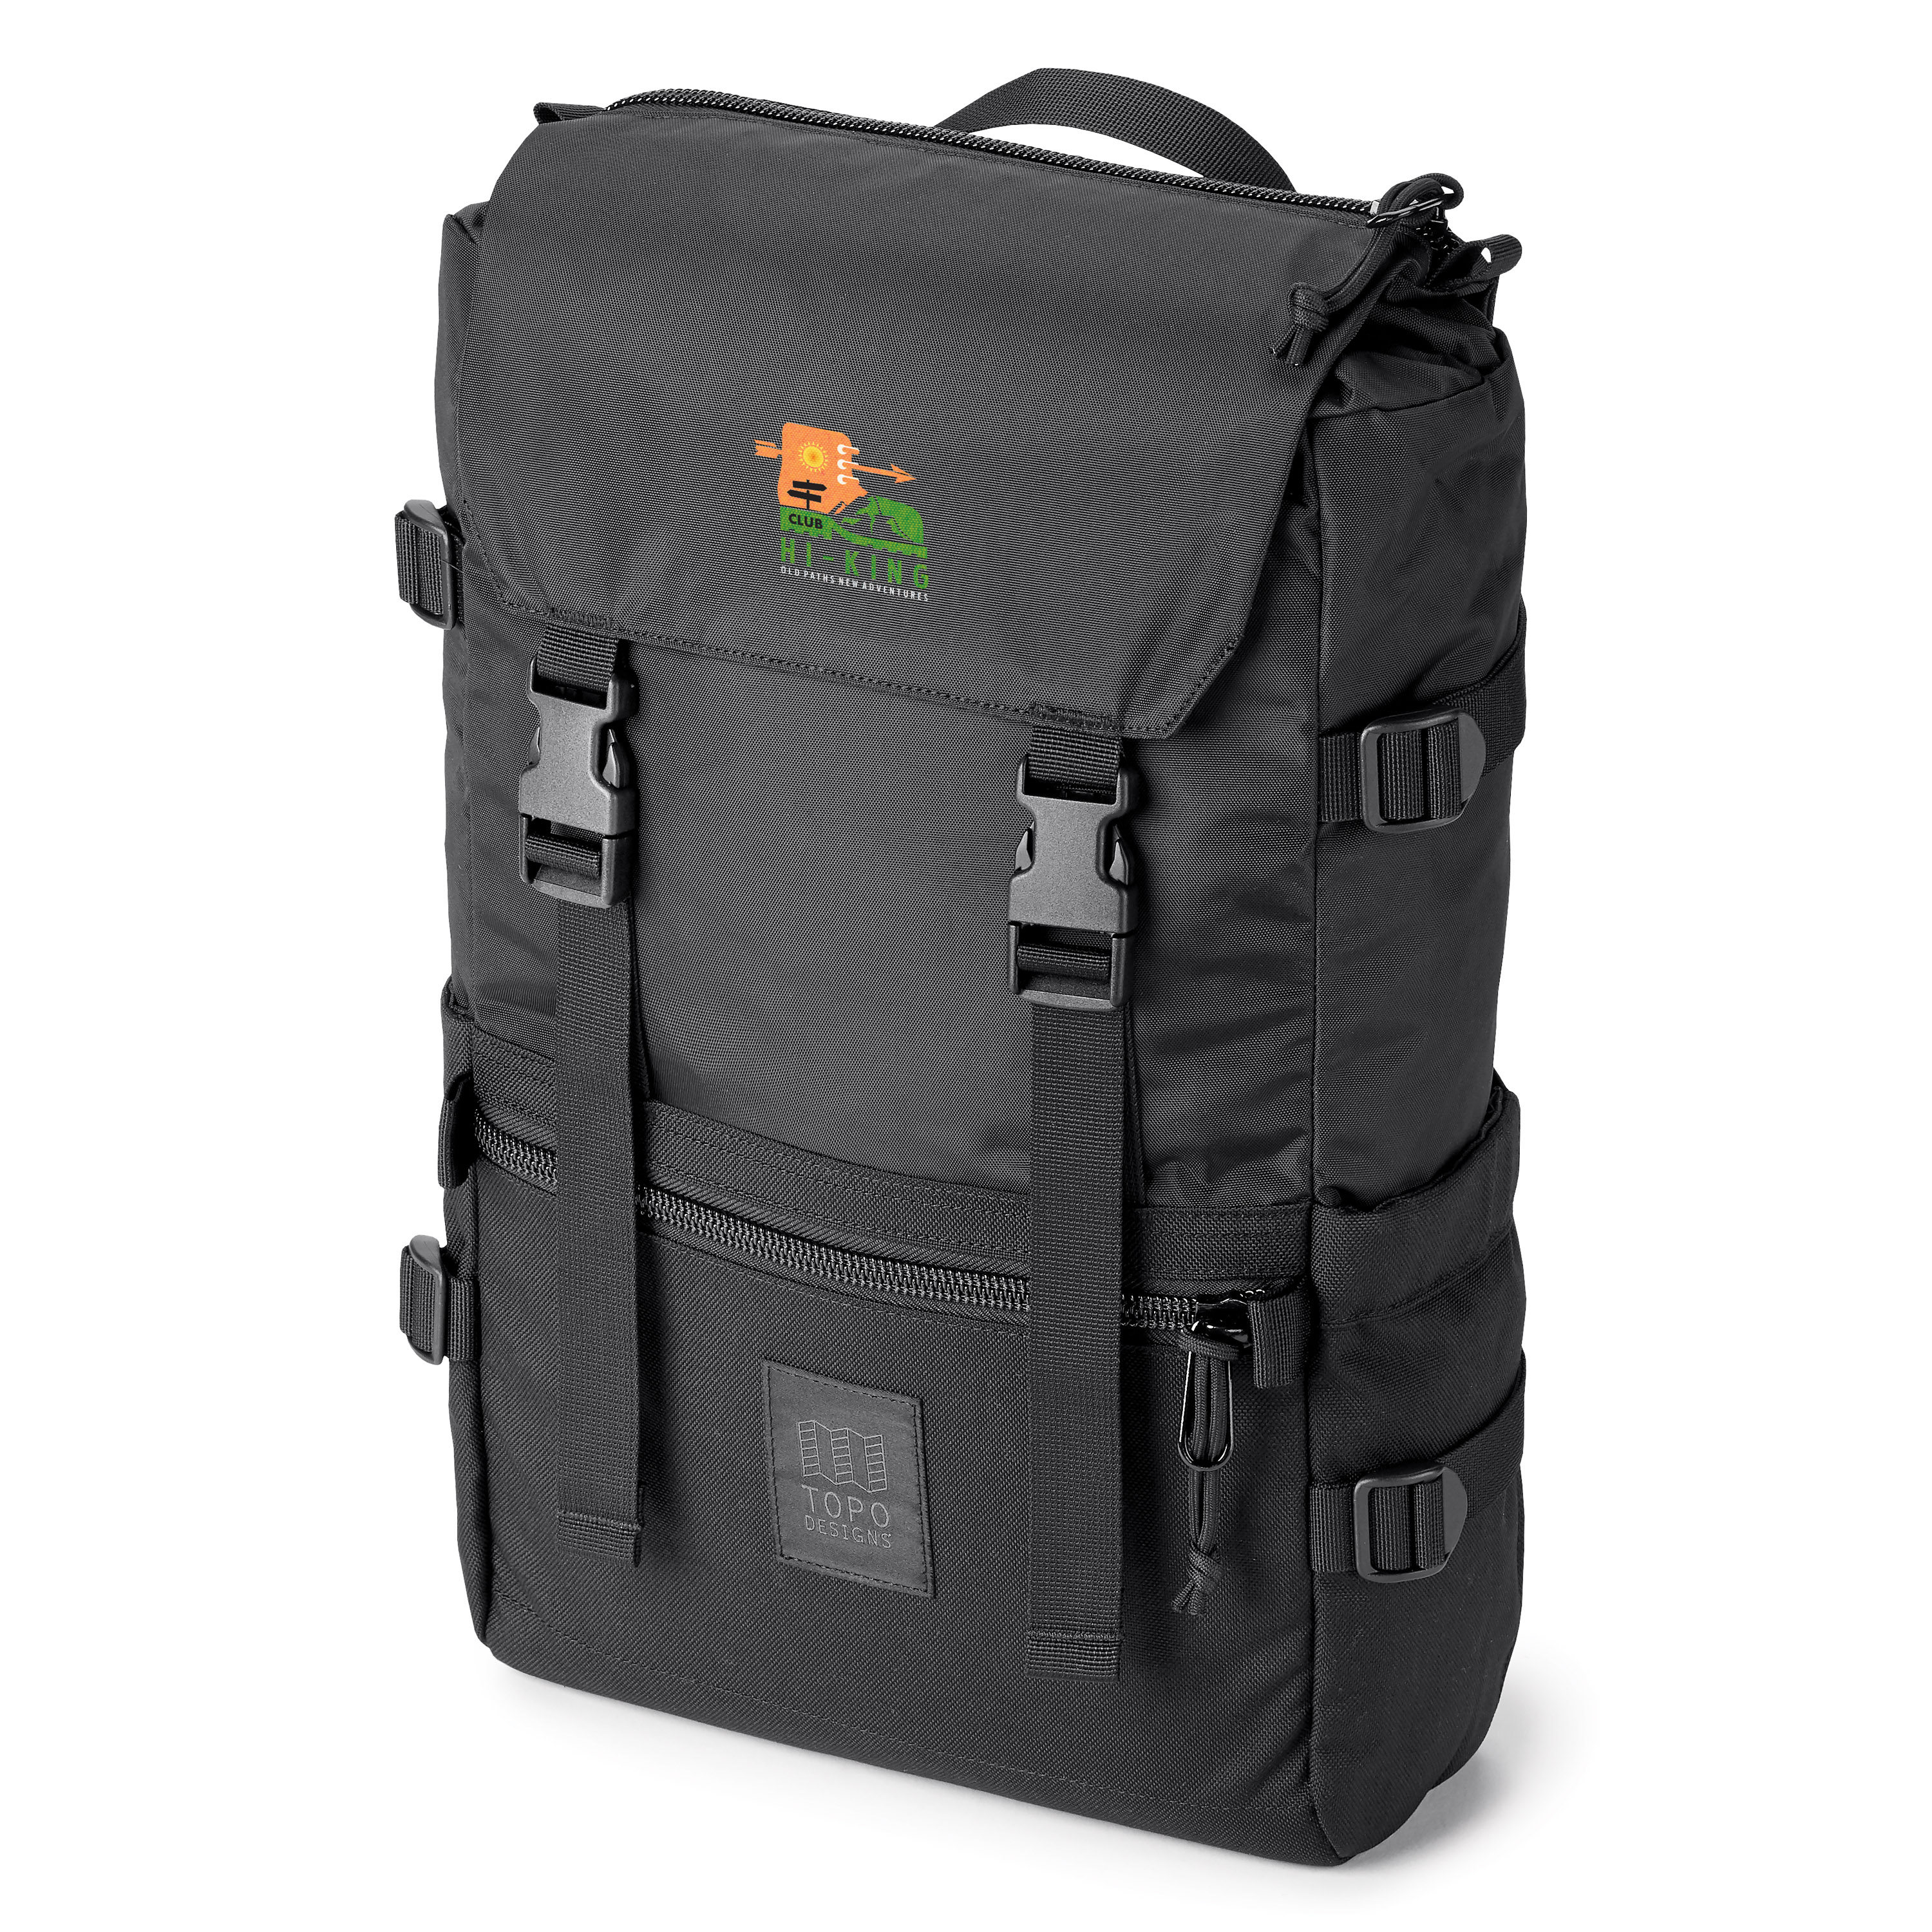 Topo Designs Rover Backpack shown at an angle with an example logo